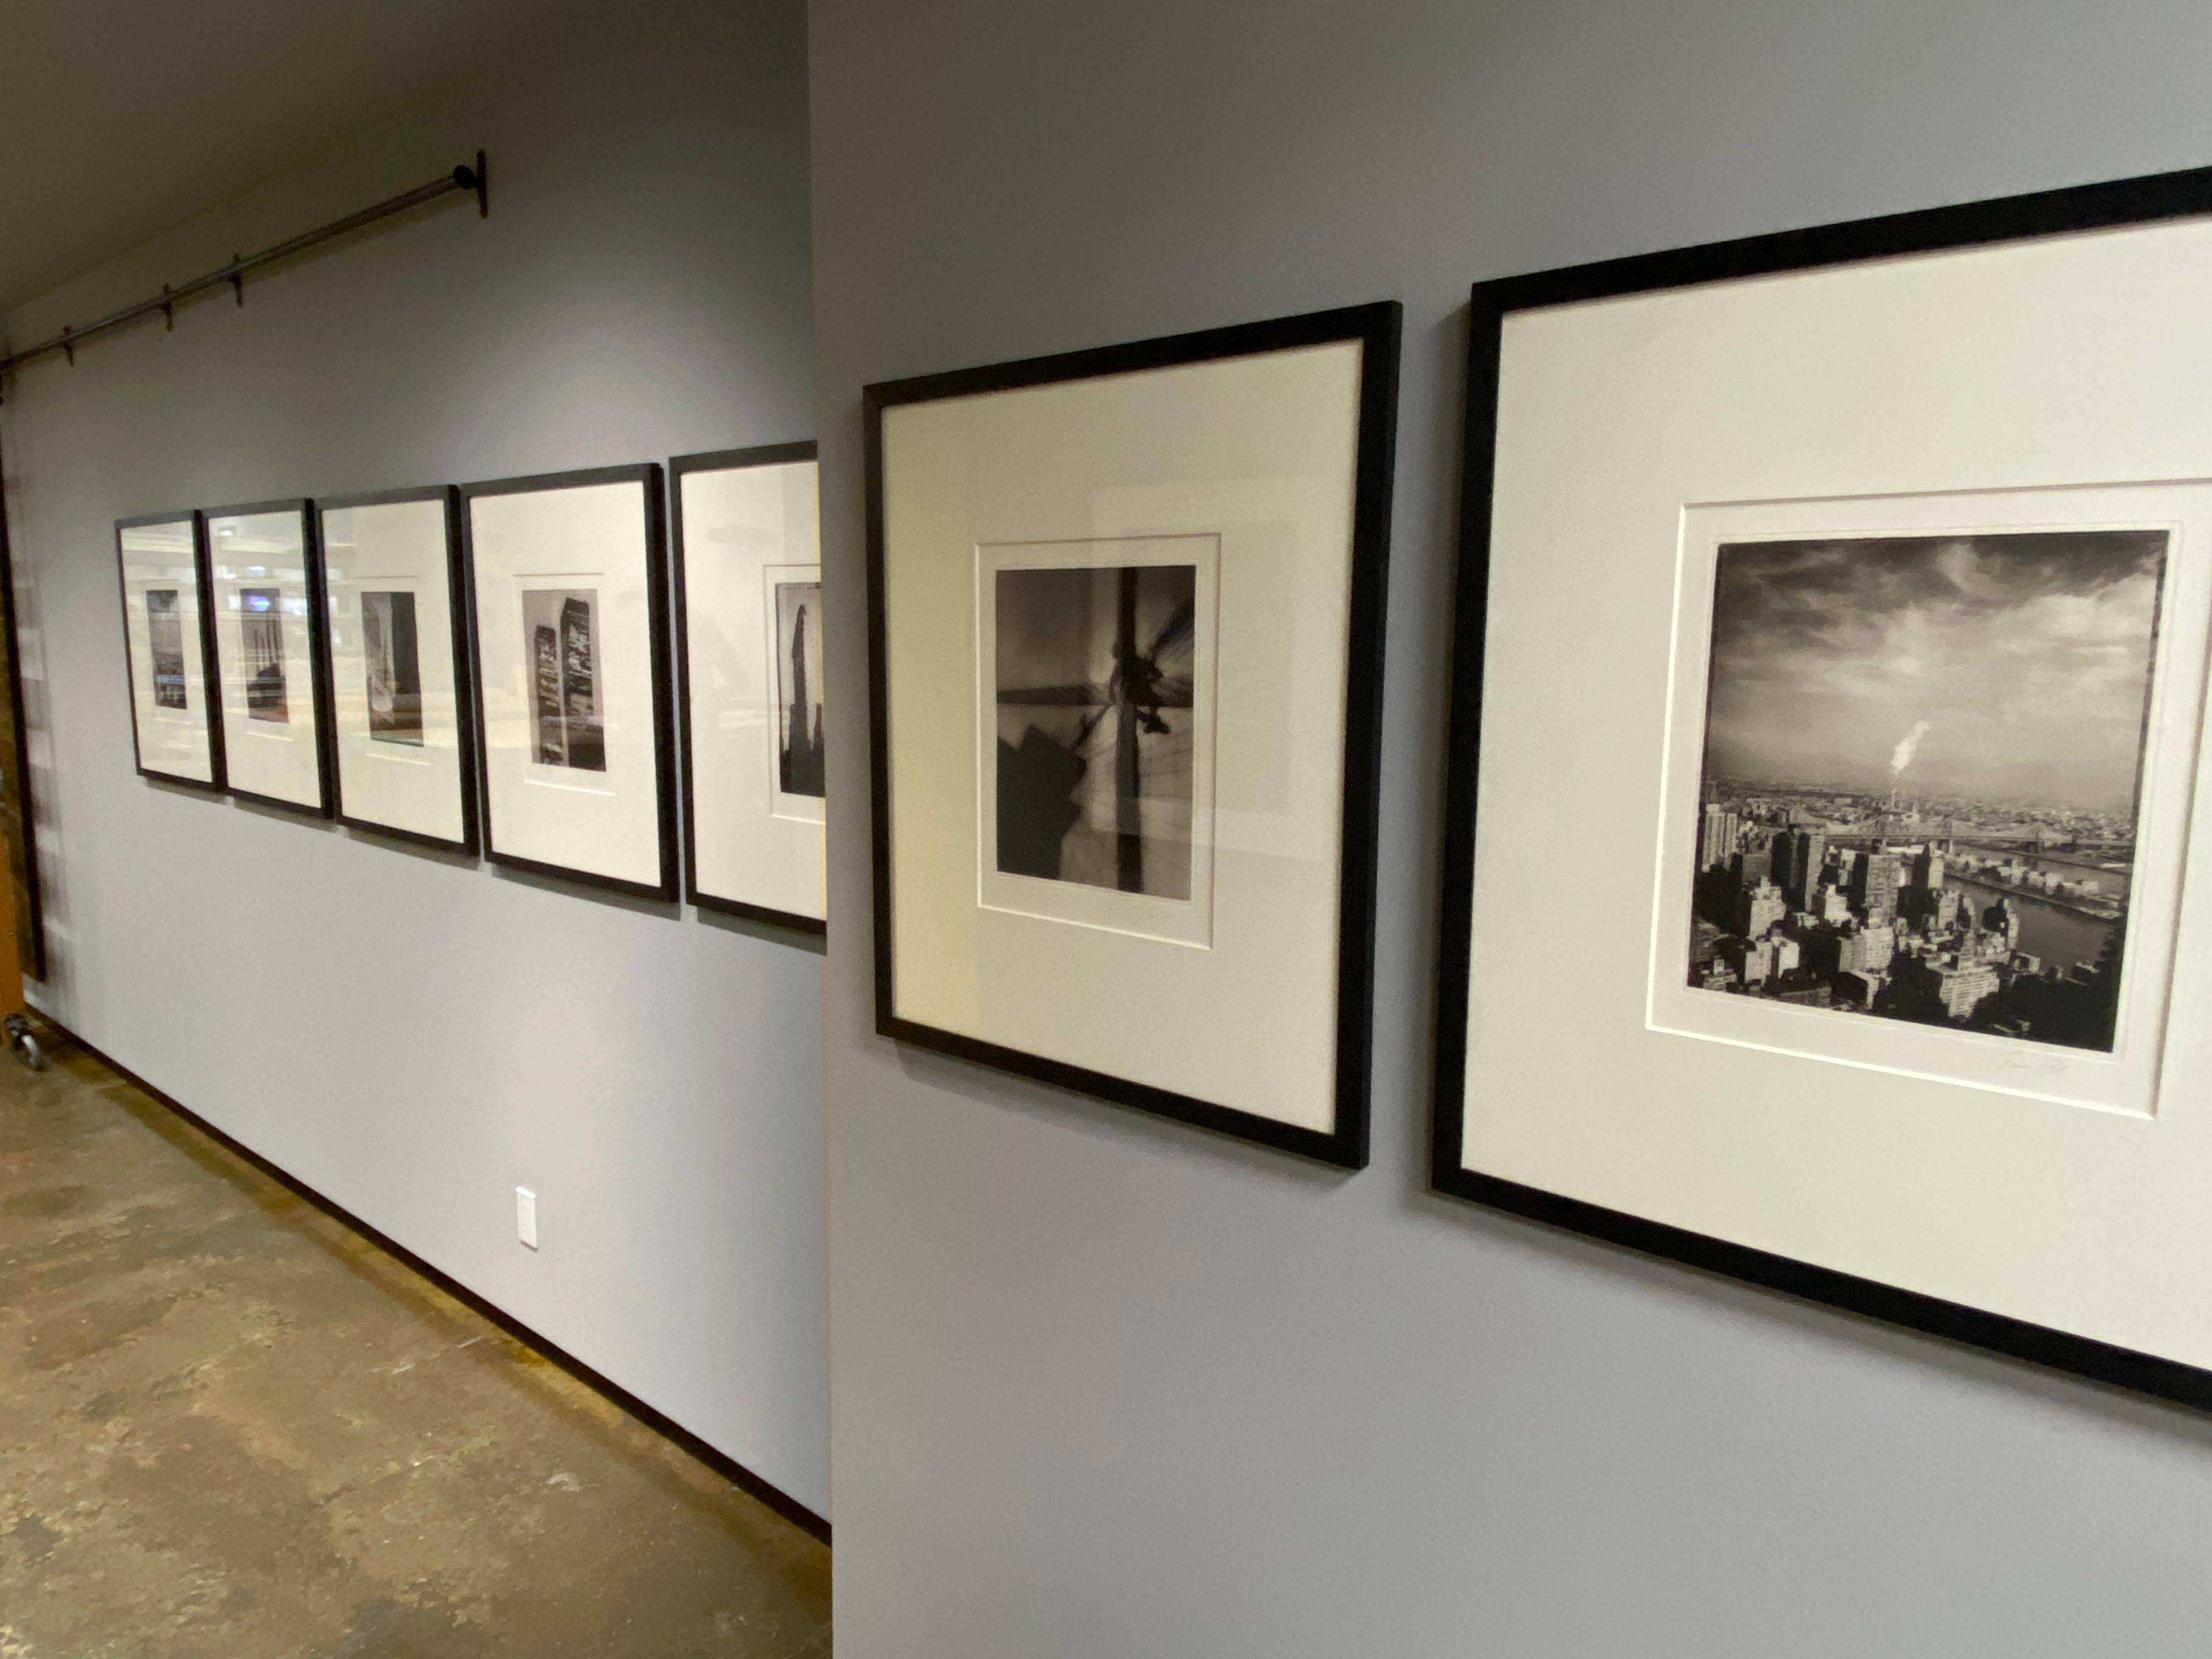 Photogravure from the Tom Baril 'Manhattan' Portfolio. 
Edition of 75, signed by the artist on bottom right.
Framing: acid free, archival framed, cotton rag mat.
Glazing: Optium museum plexi. 

A graduate of New York’s School of Visual Arts, Tom